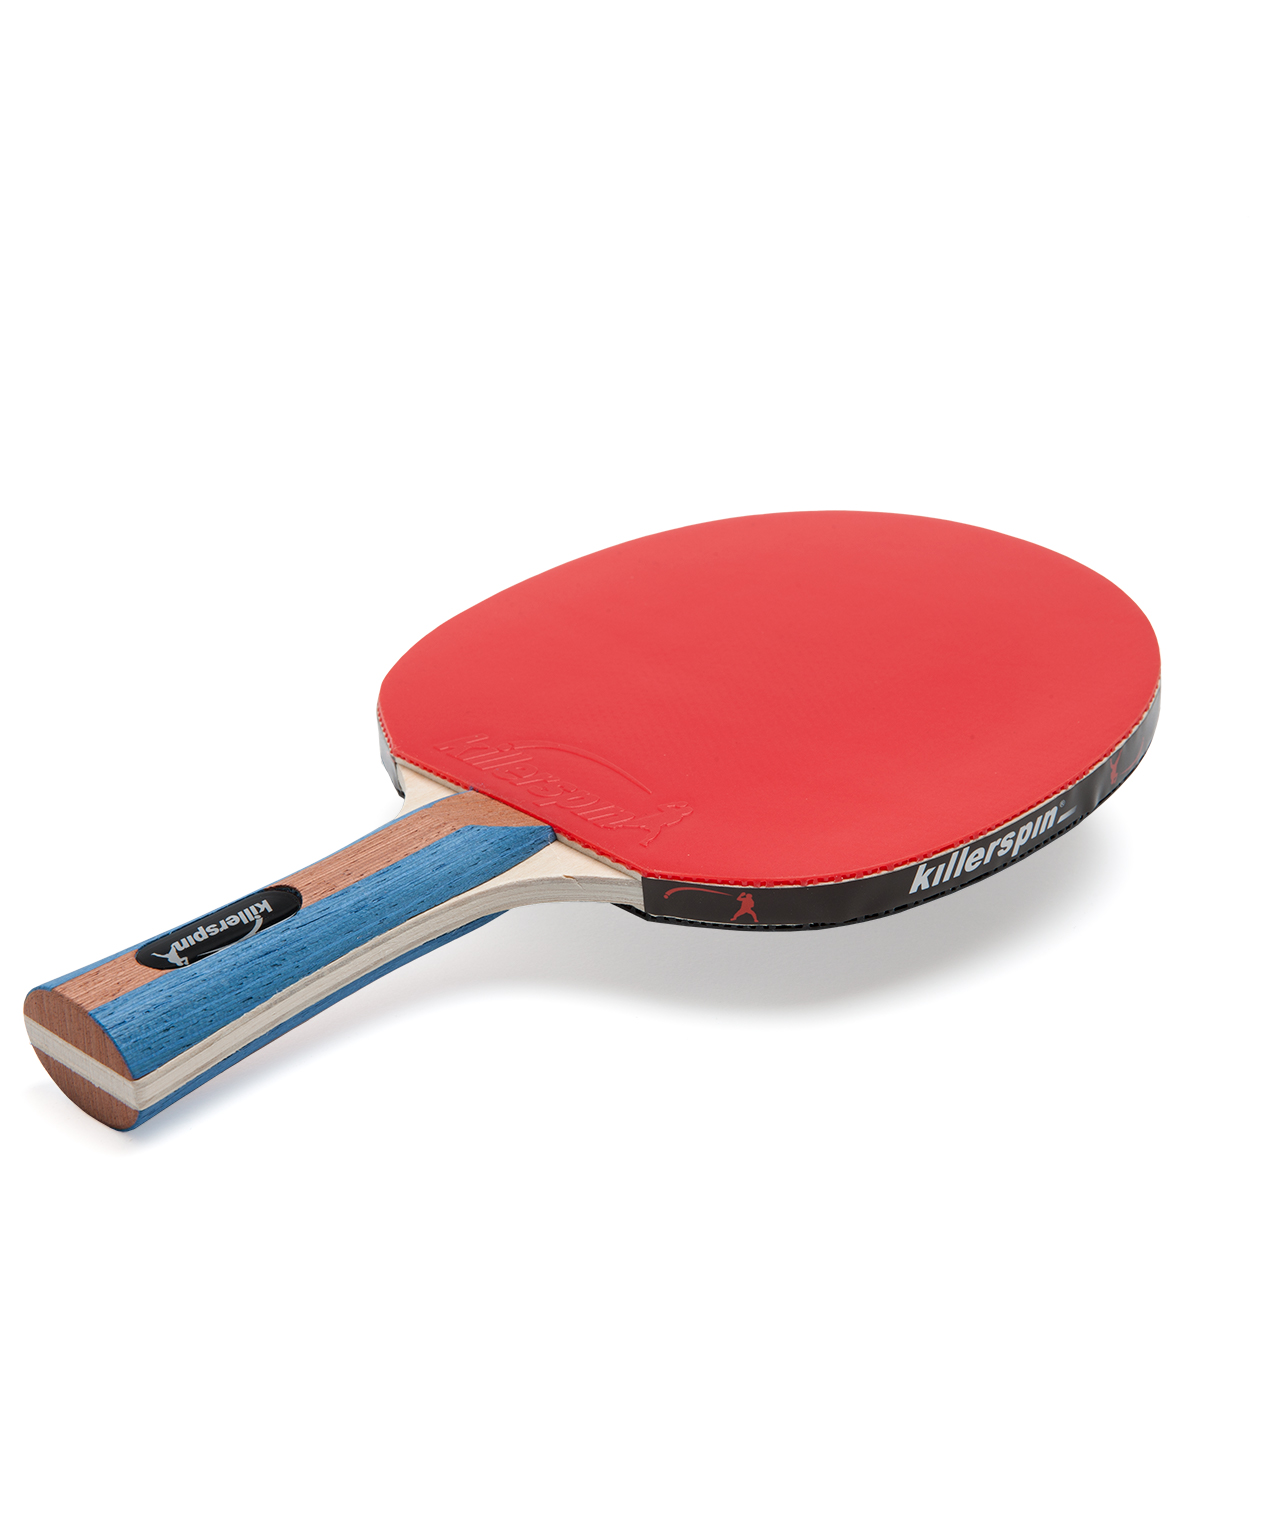 Killerspin JET SET 2 Table Tennis Set with 2 Paddles and 3 Balls - image 3 of 5